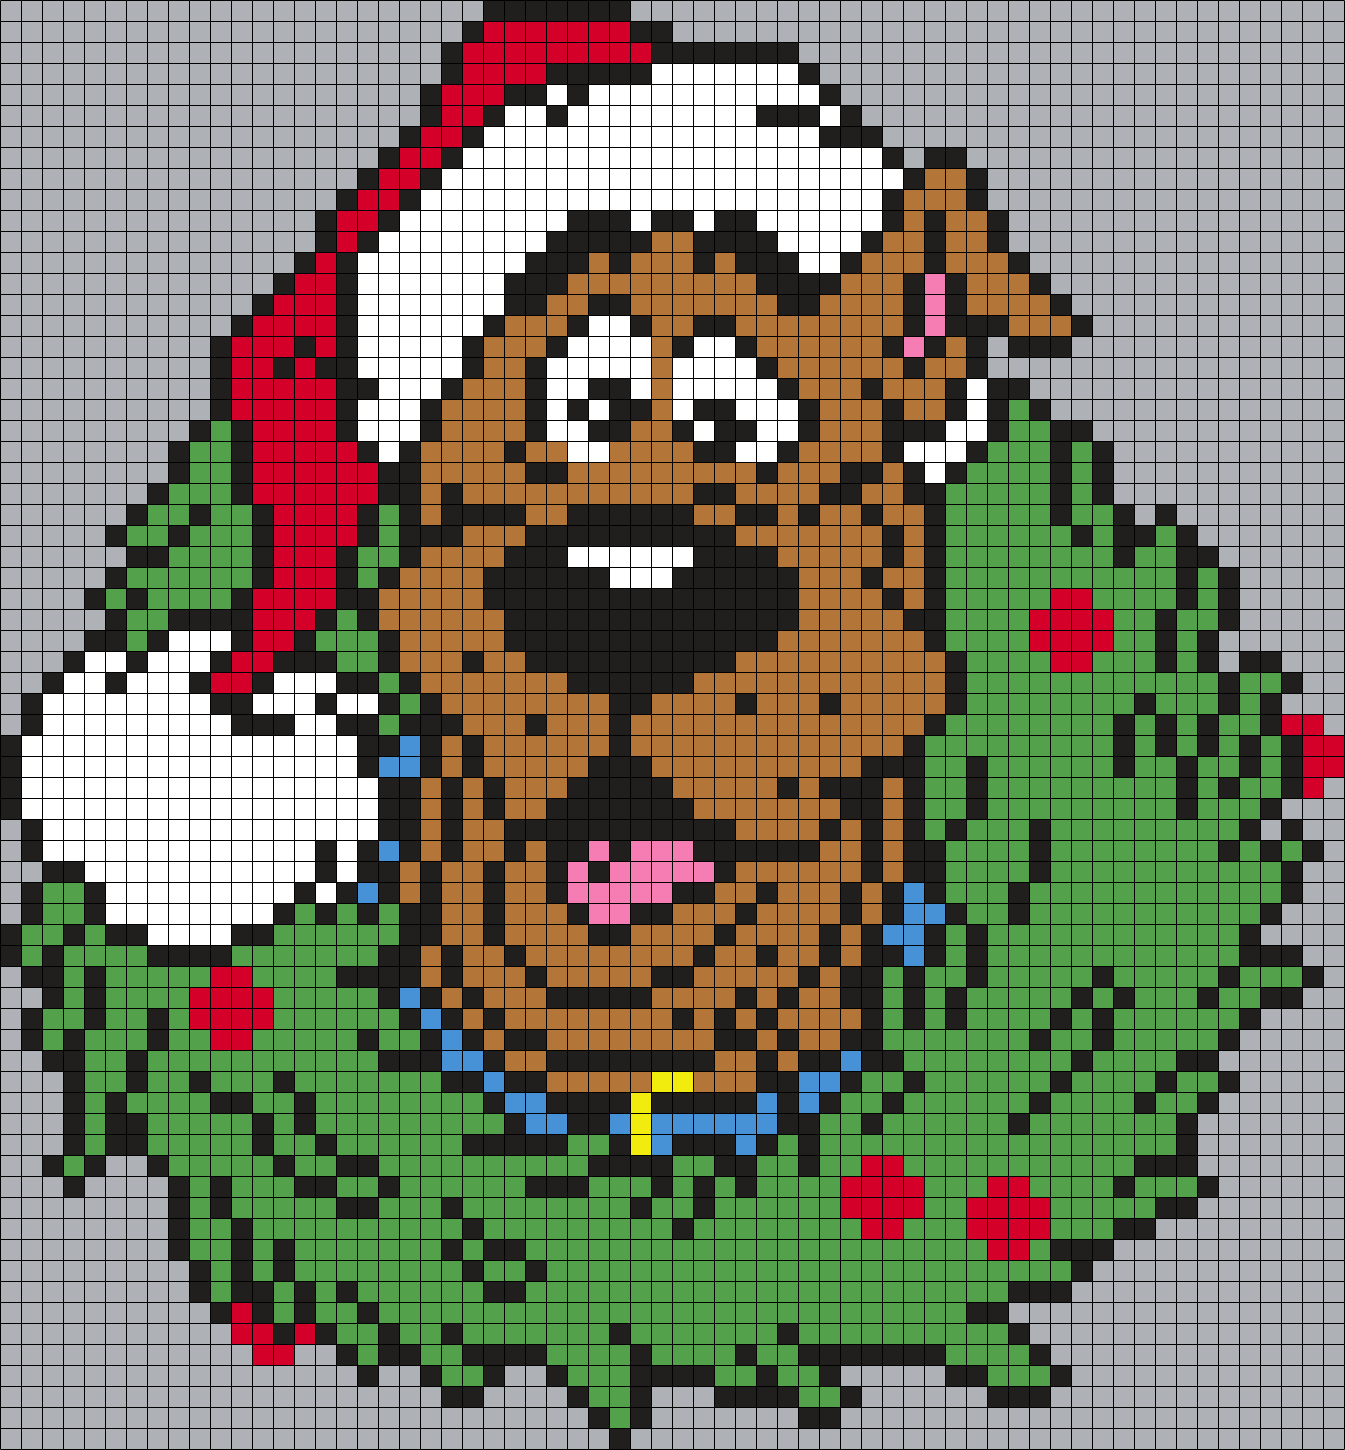 Scooby-Doo Christmas Wreath (Square Grid)